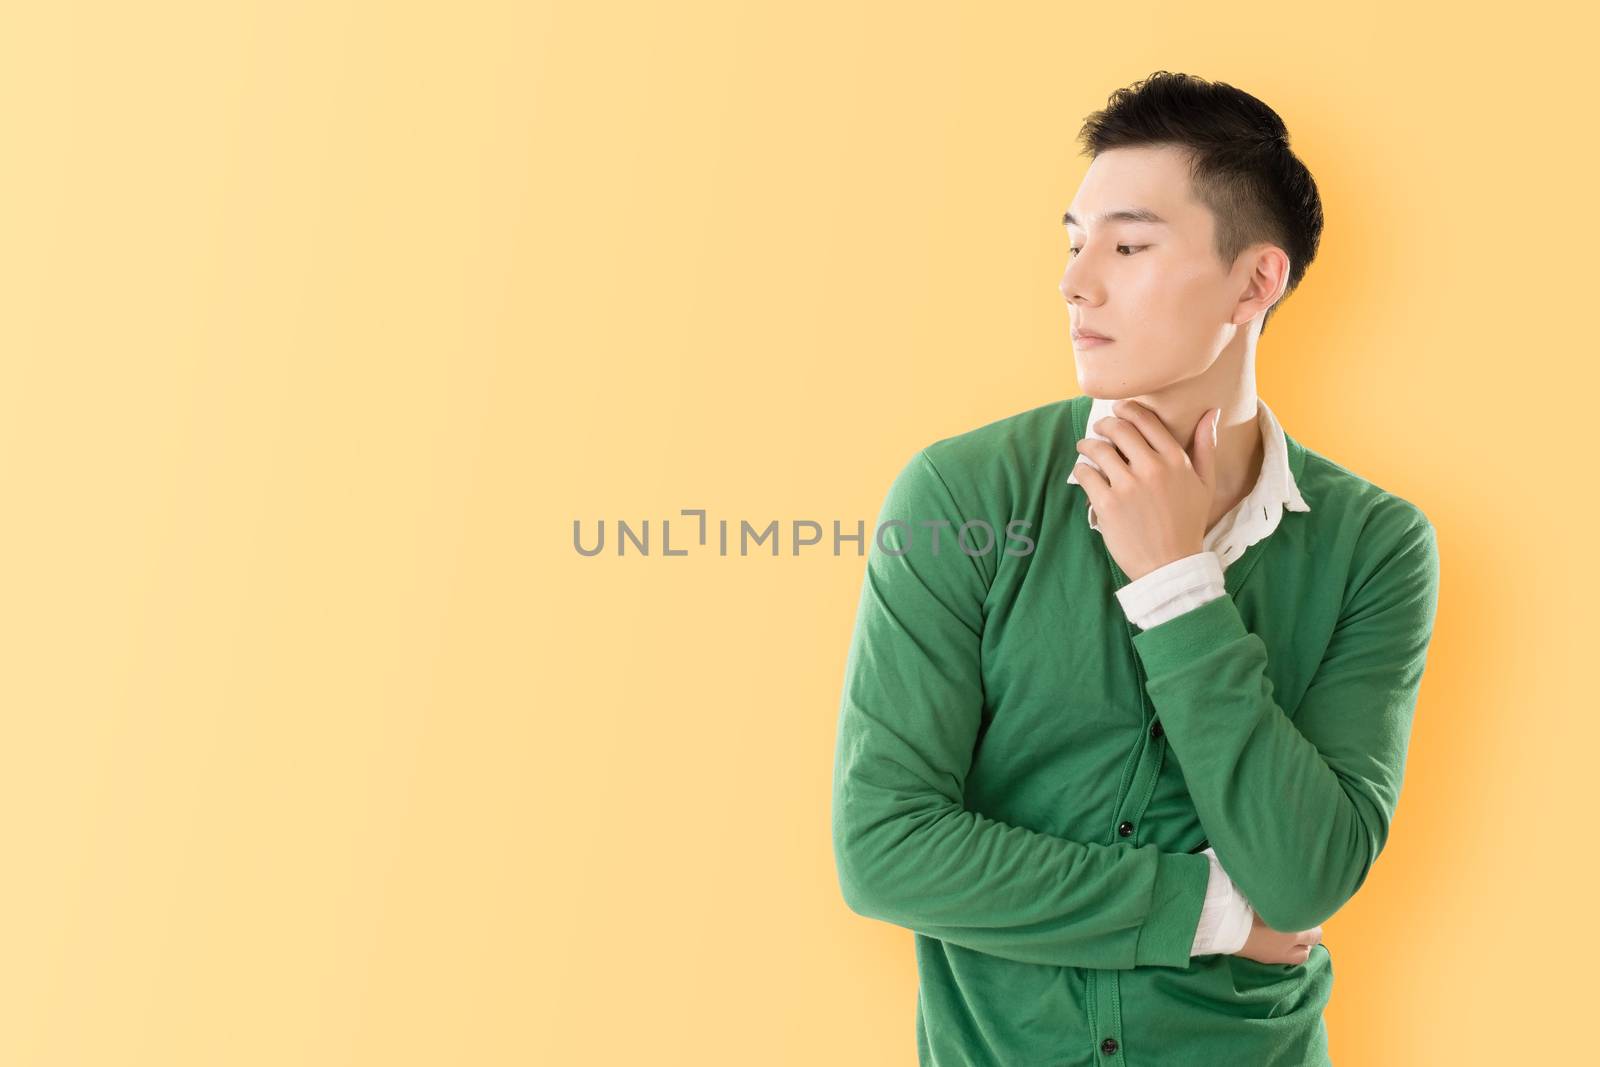 Sensitive Asian young man, closeup portrait with colorful background.